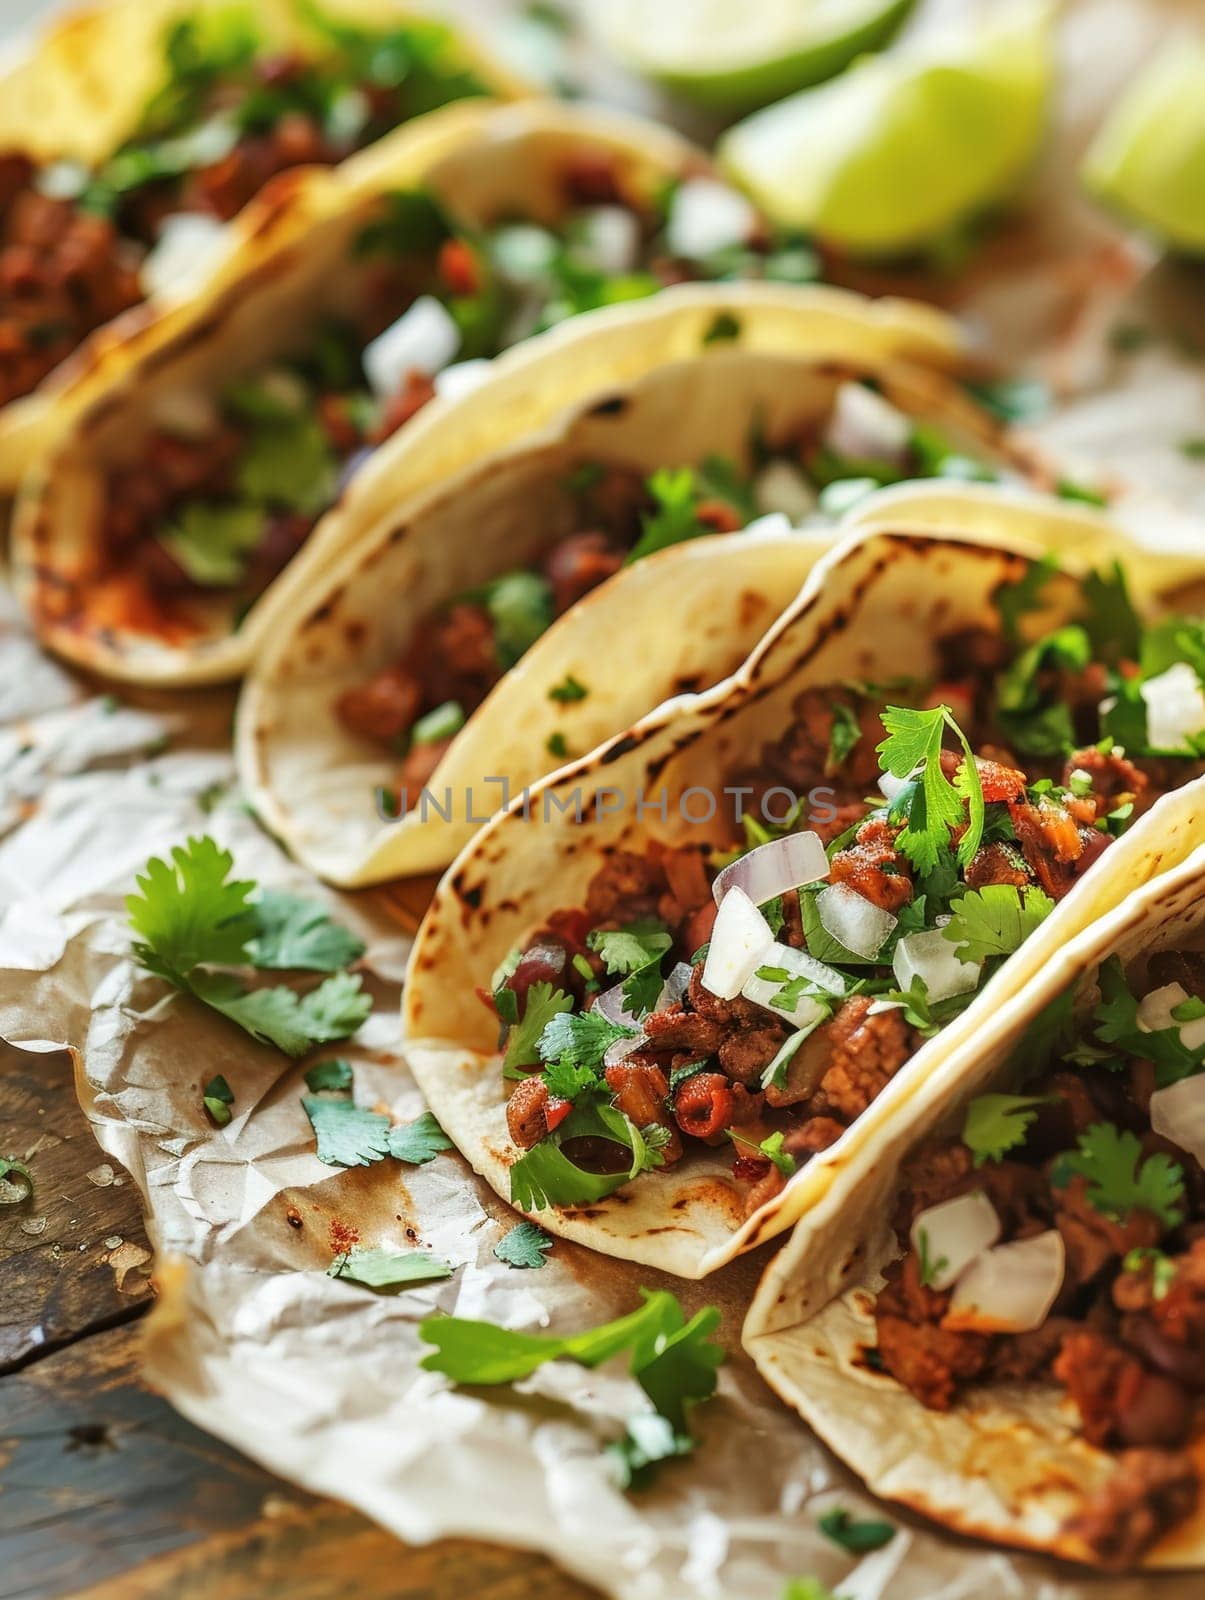 A vibrant display of authentic Mexican tacos, featuring a variety of fillings wrapped in soft corn tortillas and topped with fresh cilantro, onions, and tangy lime slices. by sfinks